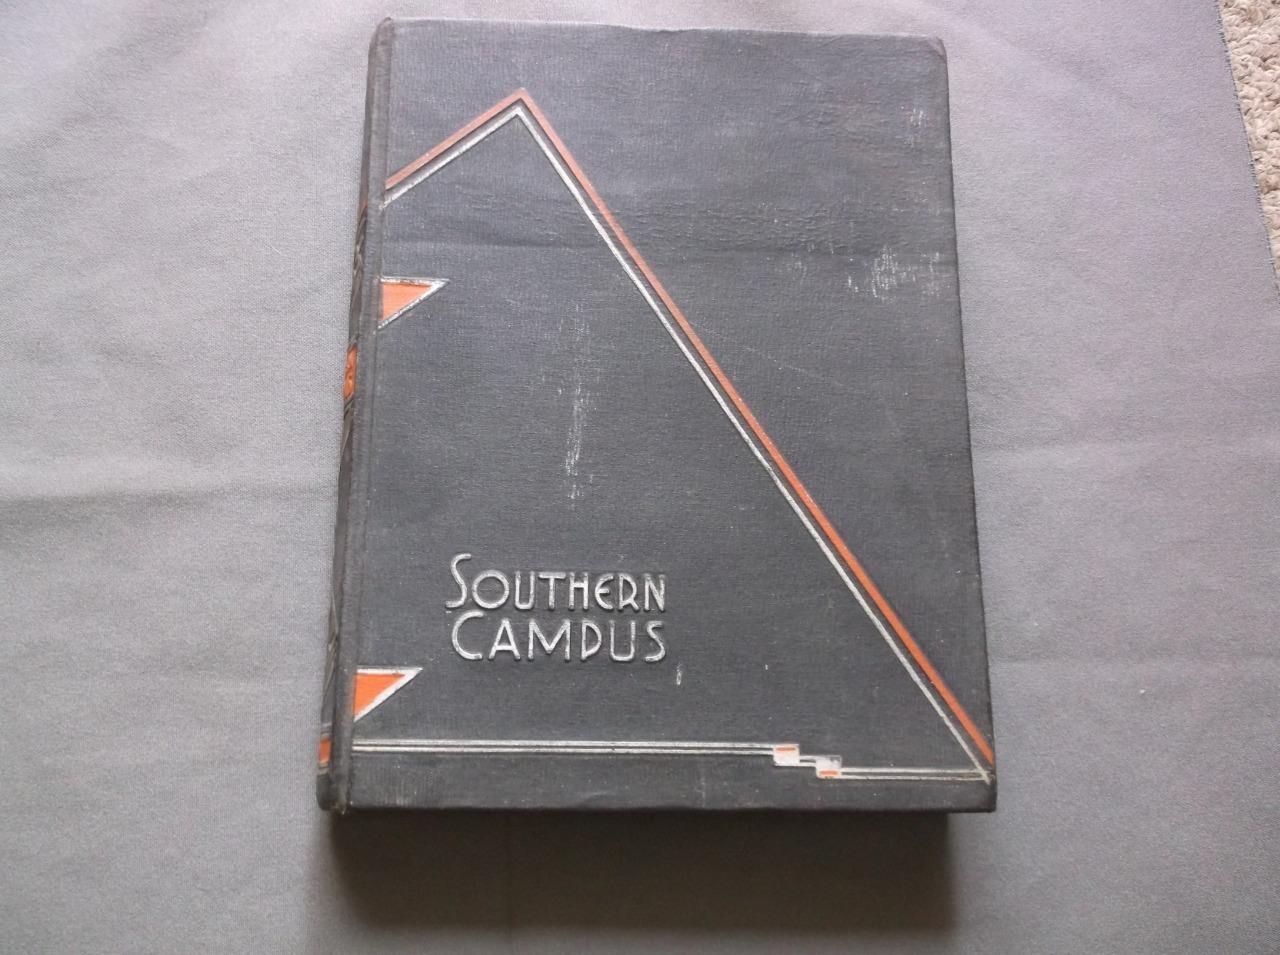 Yearbook Annual UCLA University of California Los Angeles 1932 Southern Campus